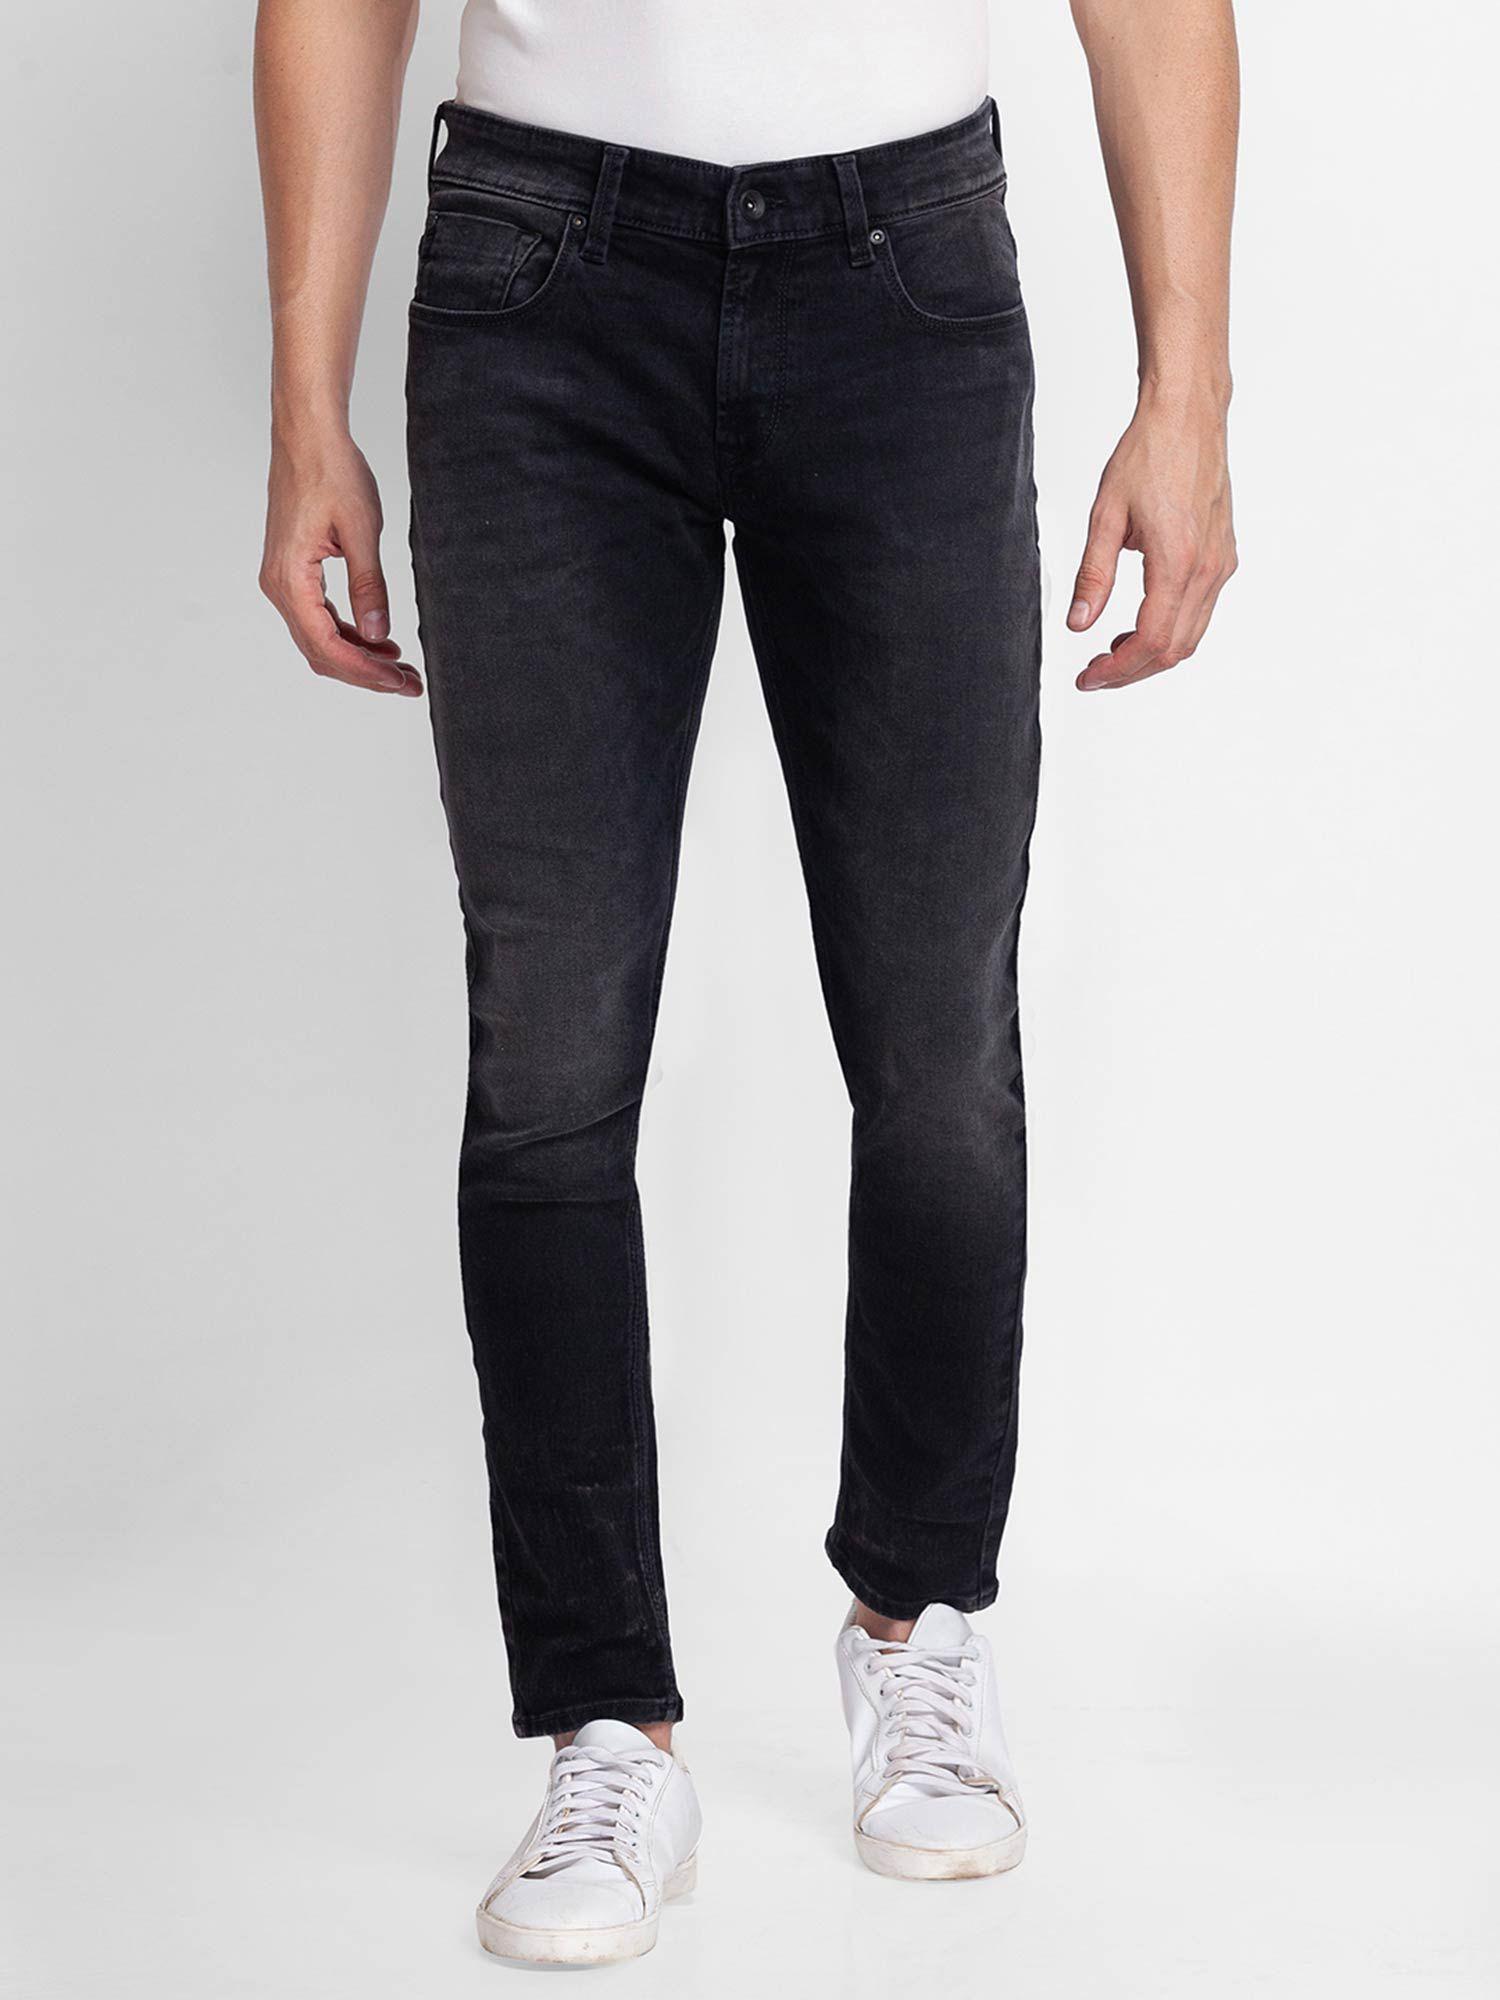 charcoal-black-cotton-slim-fit-tapered-length-jeans-for-men-(kano)